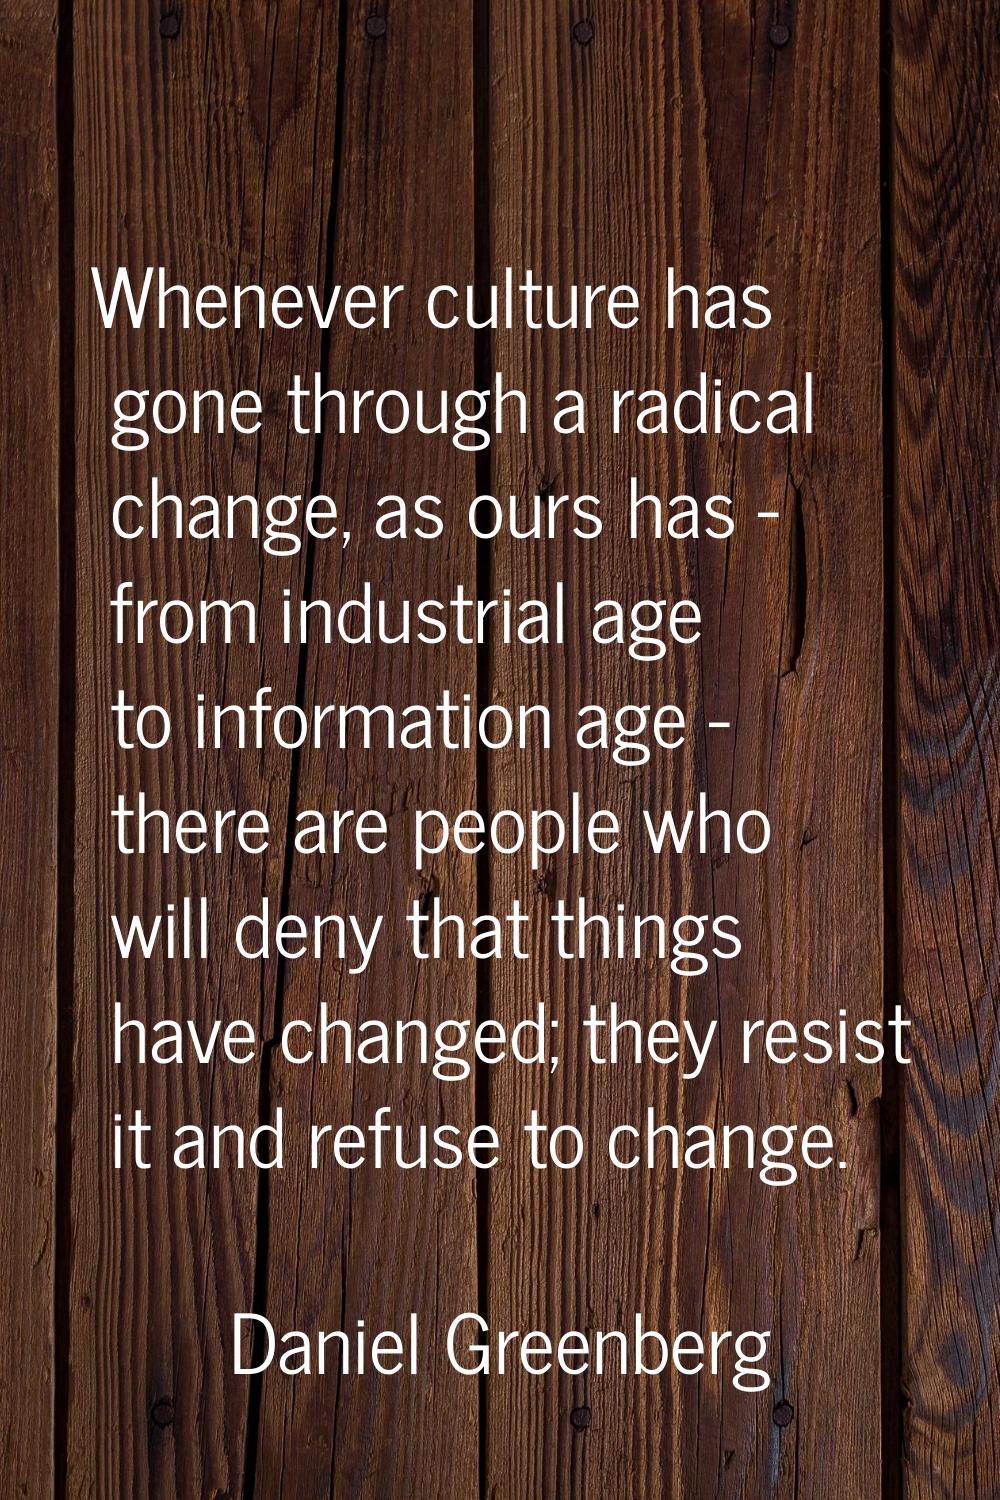 Whenever culture has gone through a radical change, as ours has - from industrial age to informatio